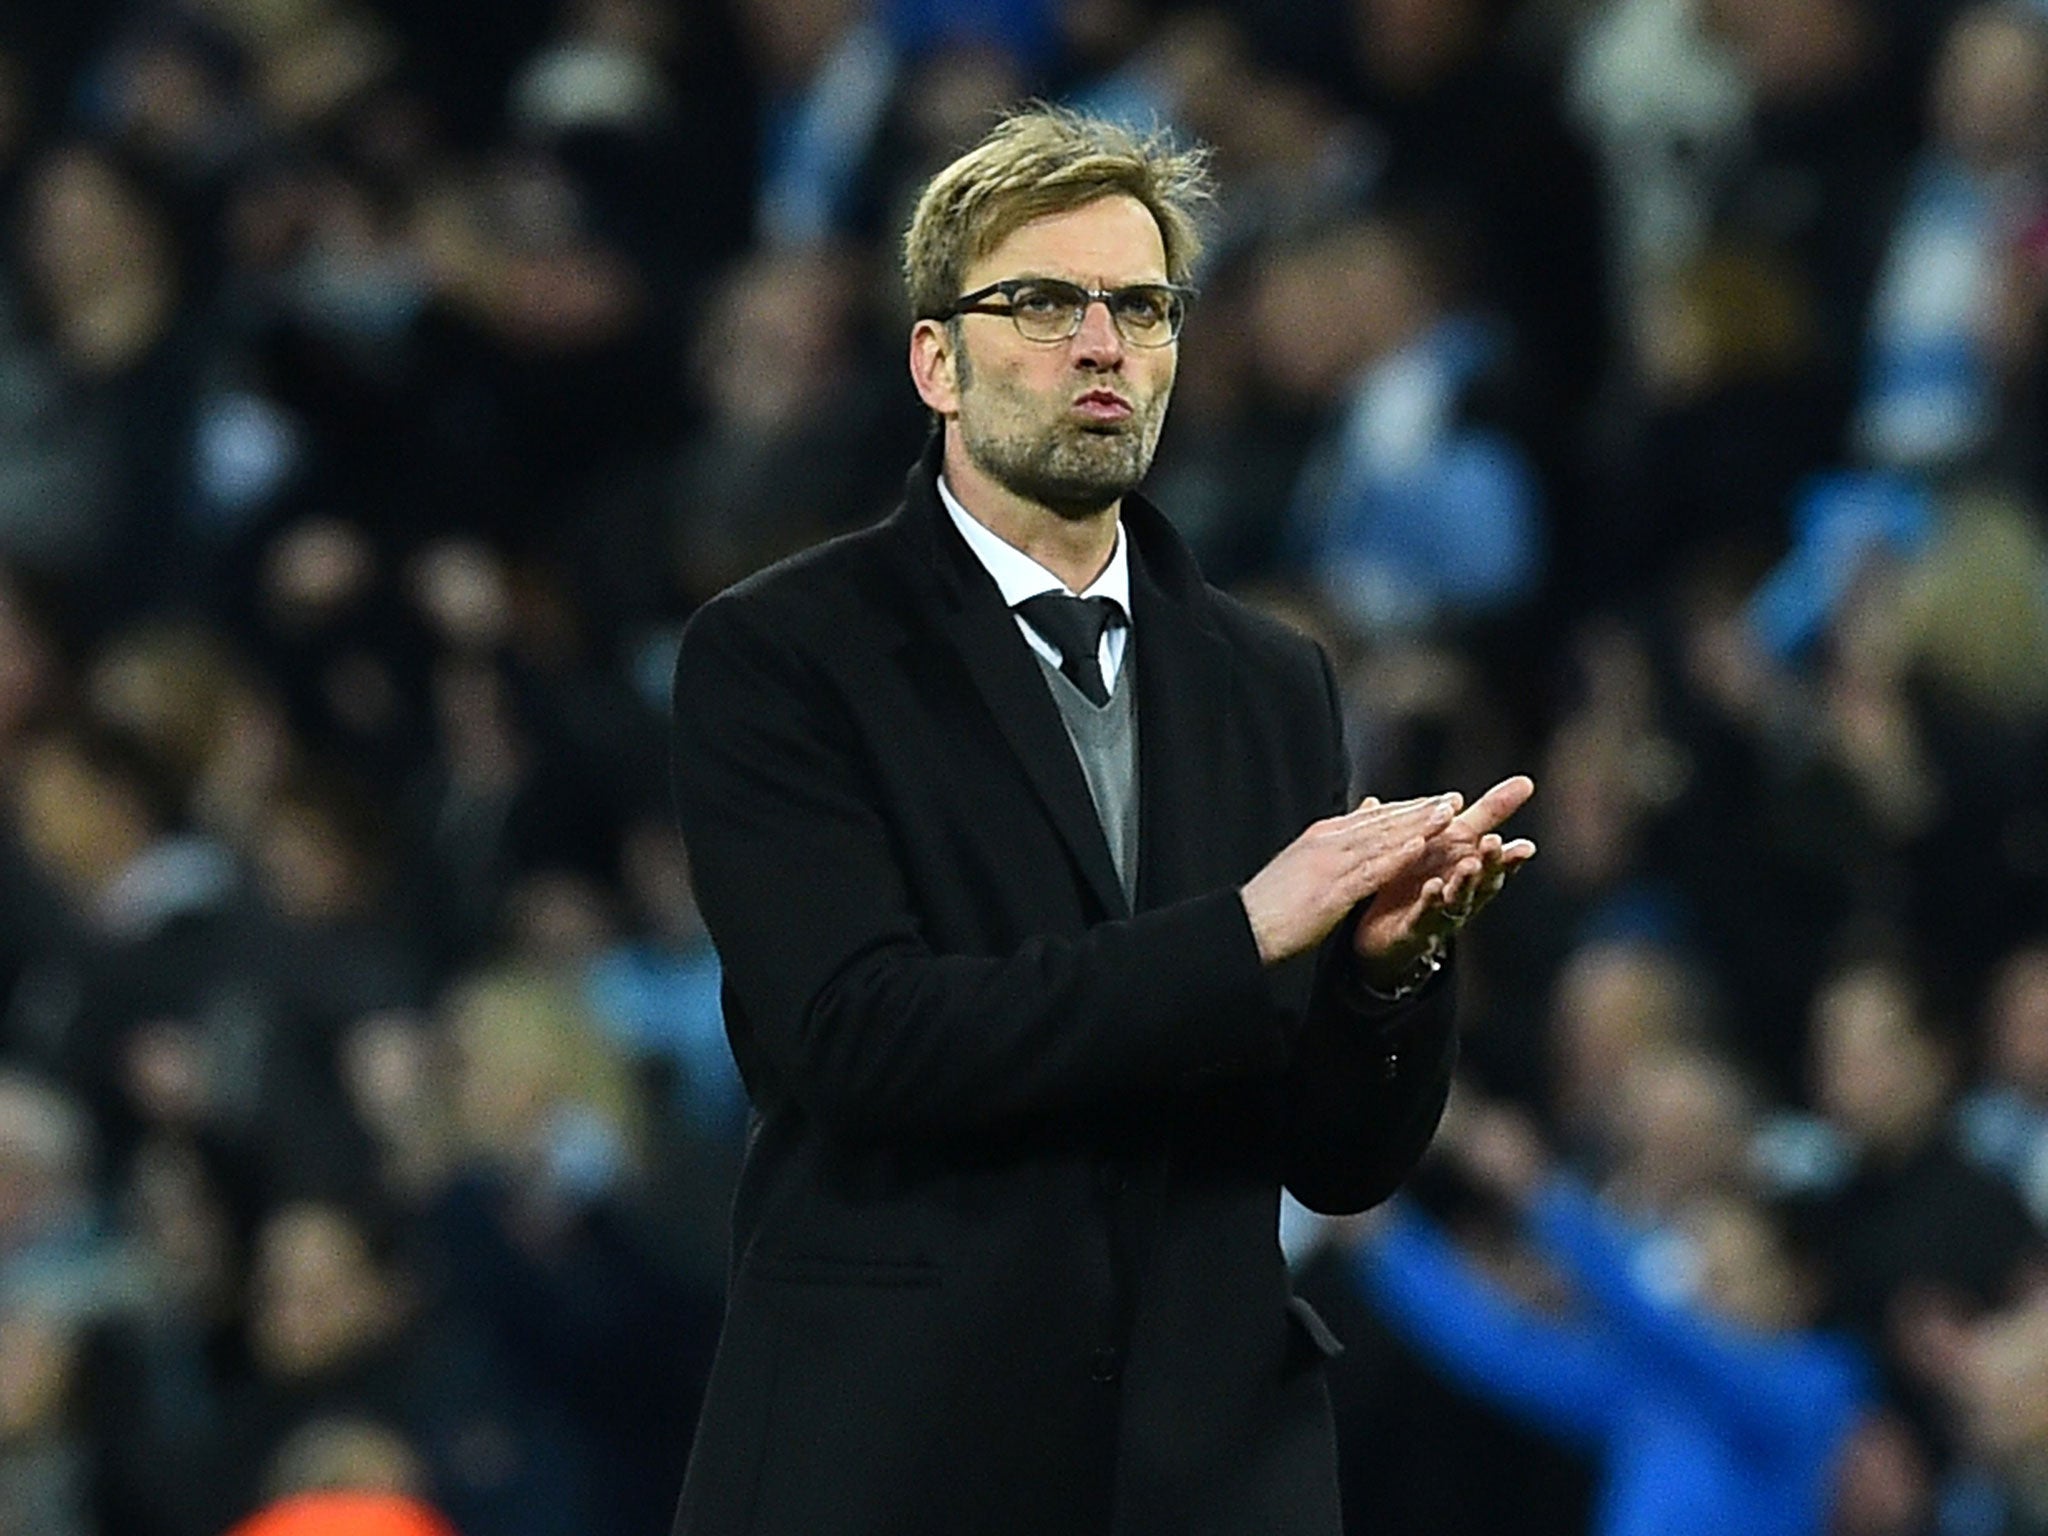 A disappointed Jürgen Klopp applauds the Liverpool fans at the end of the match